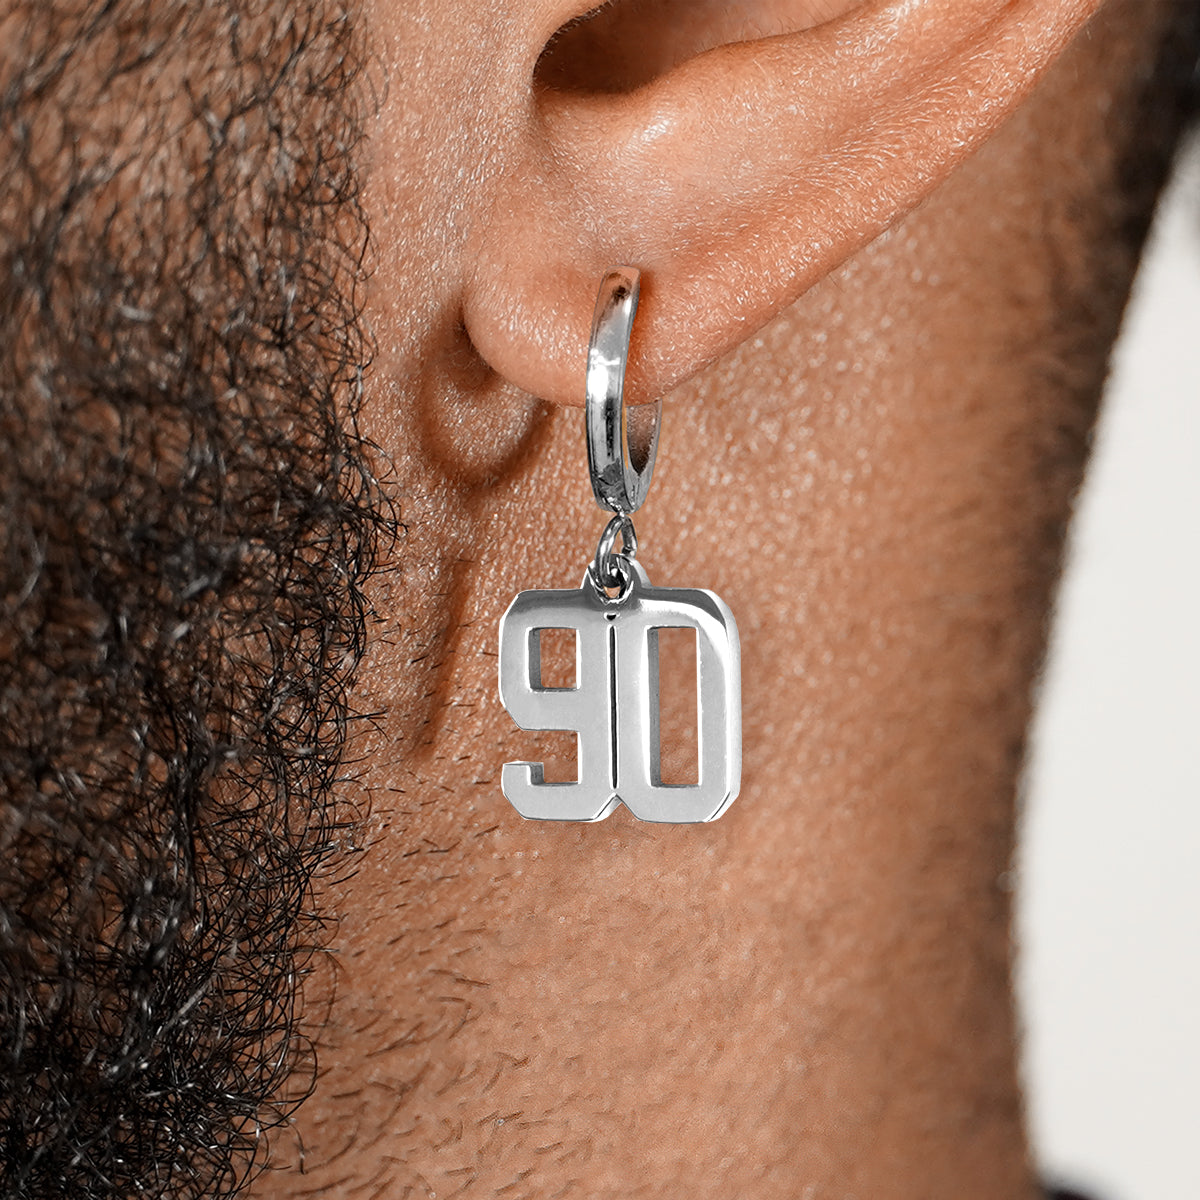 90 Number Earring - Stainless Steel